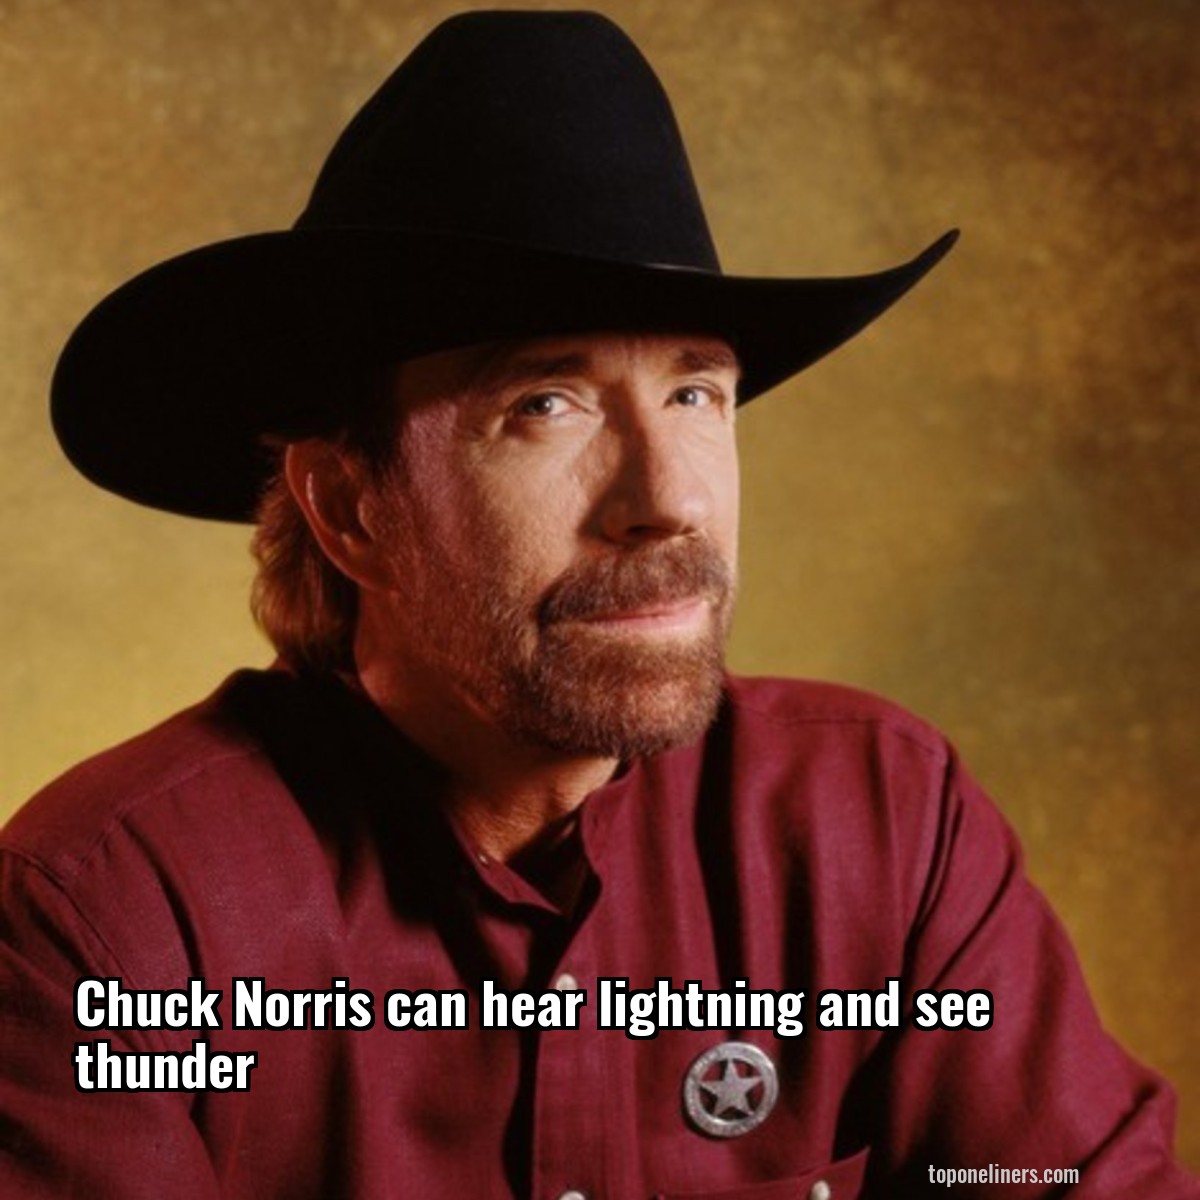 Chuck Norris can hear lightning and see thunder